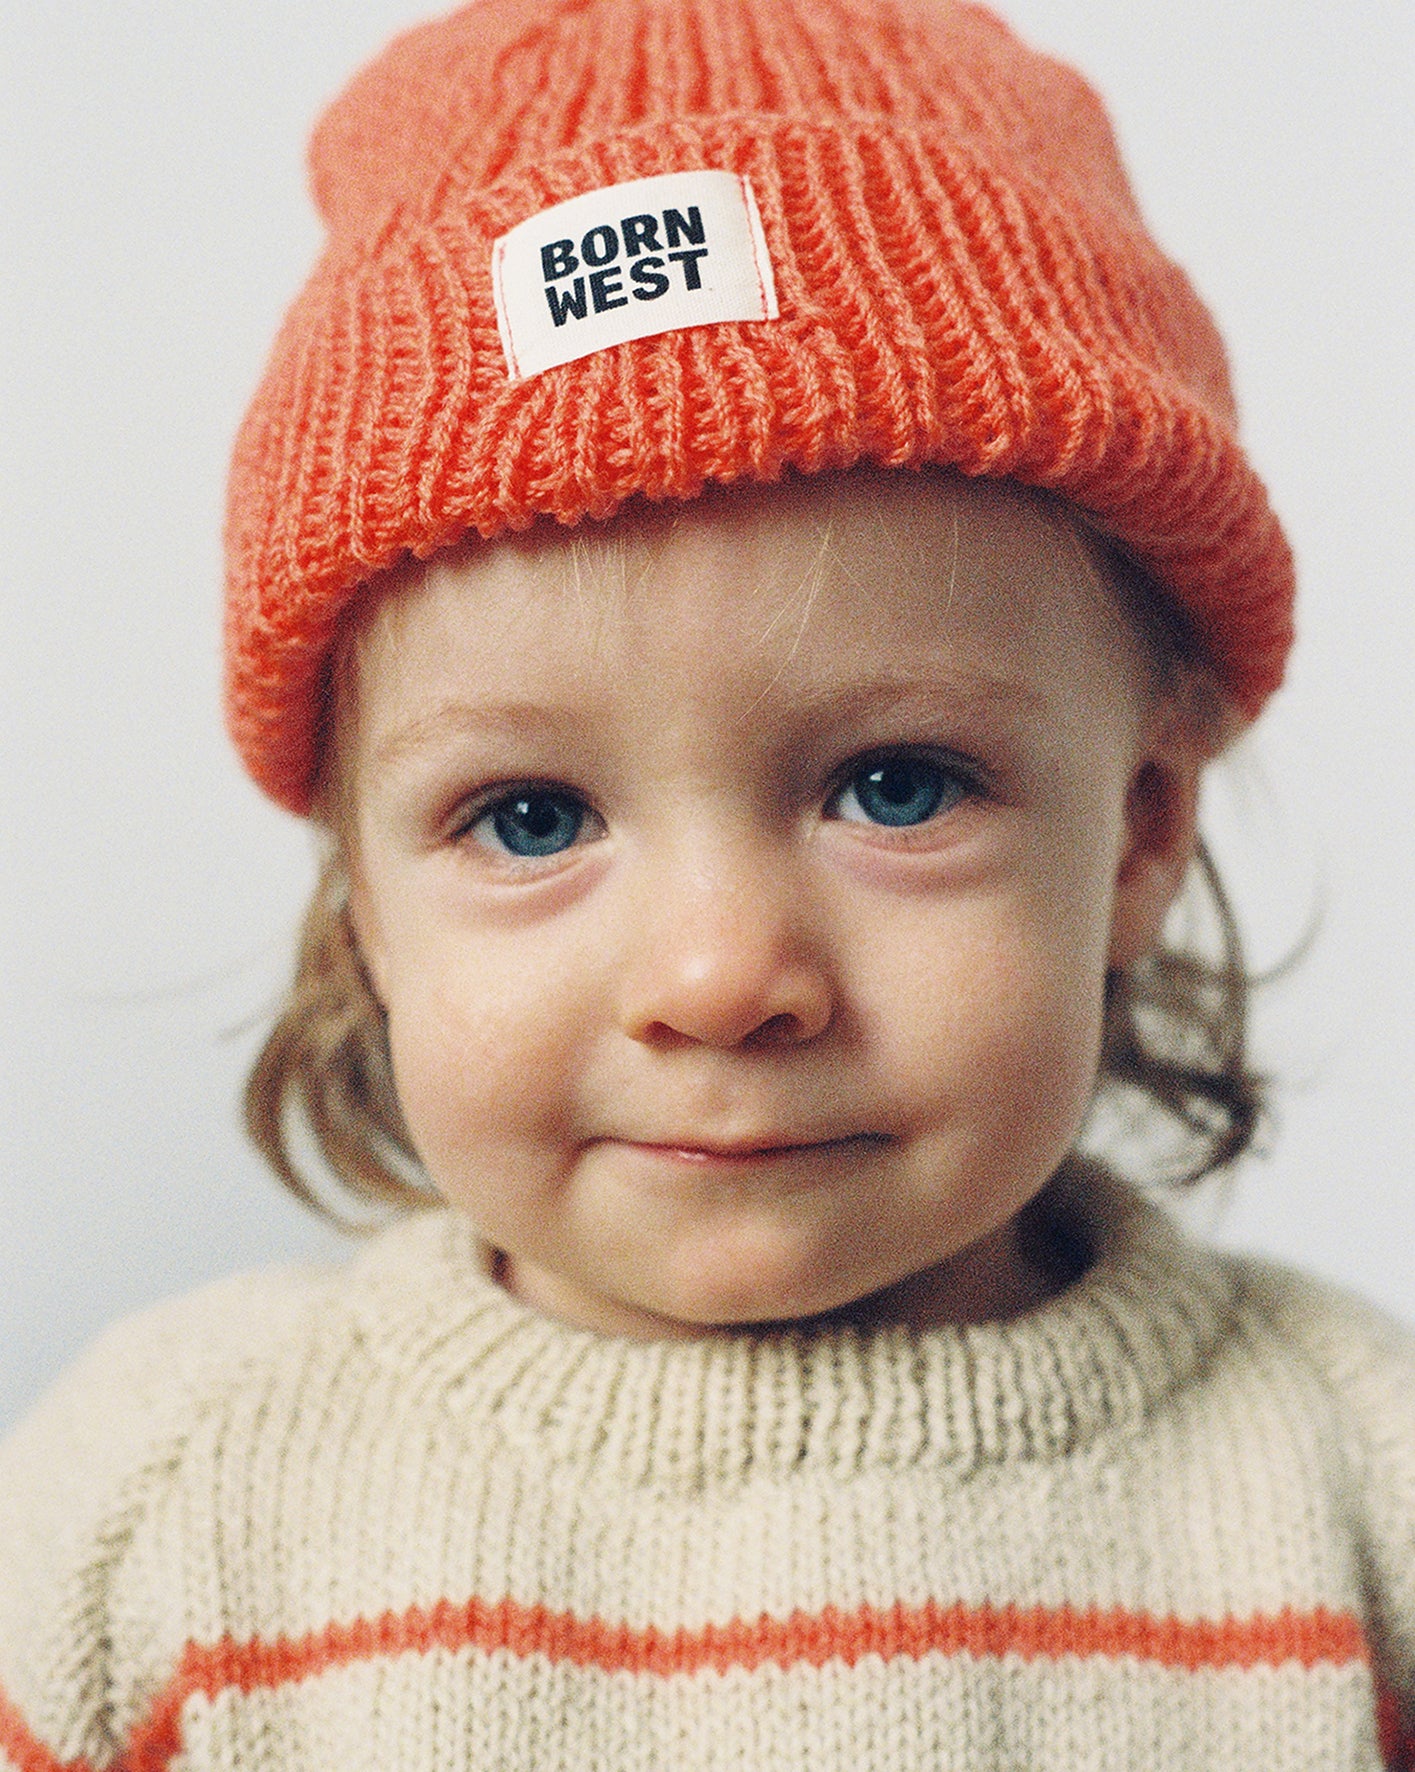 Born West - Hand Knitted Beanie - Apricot